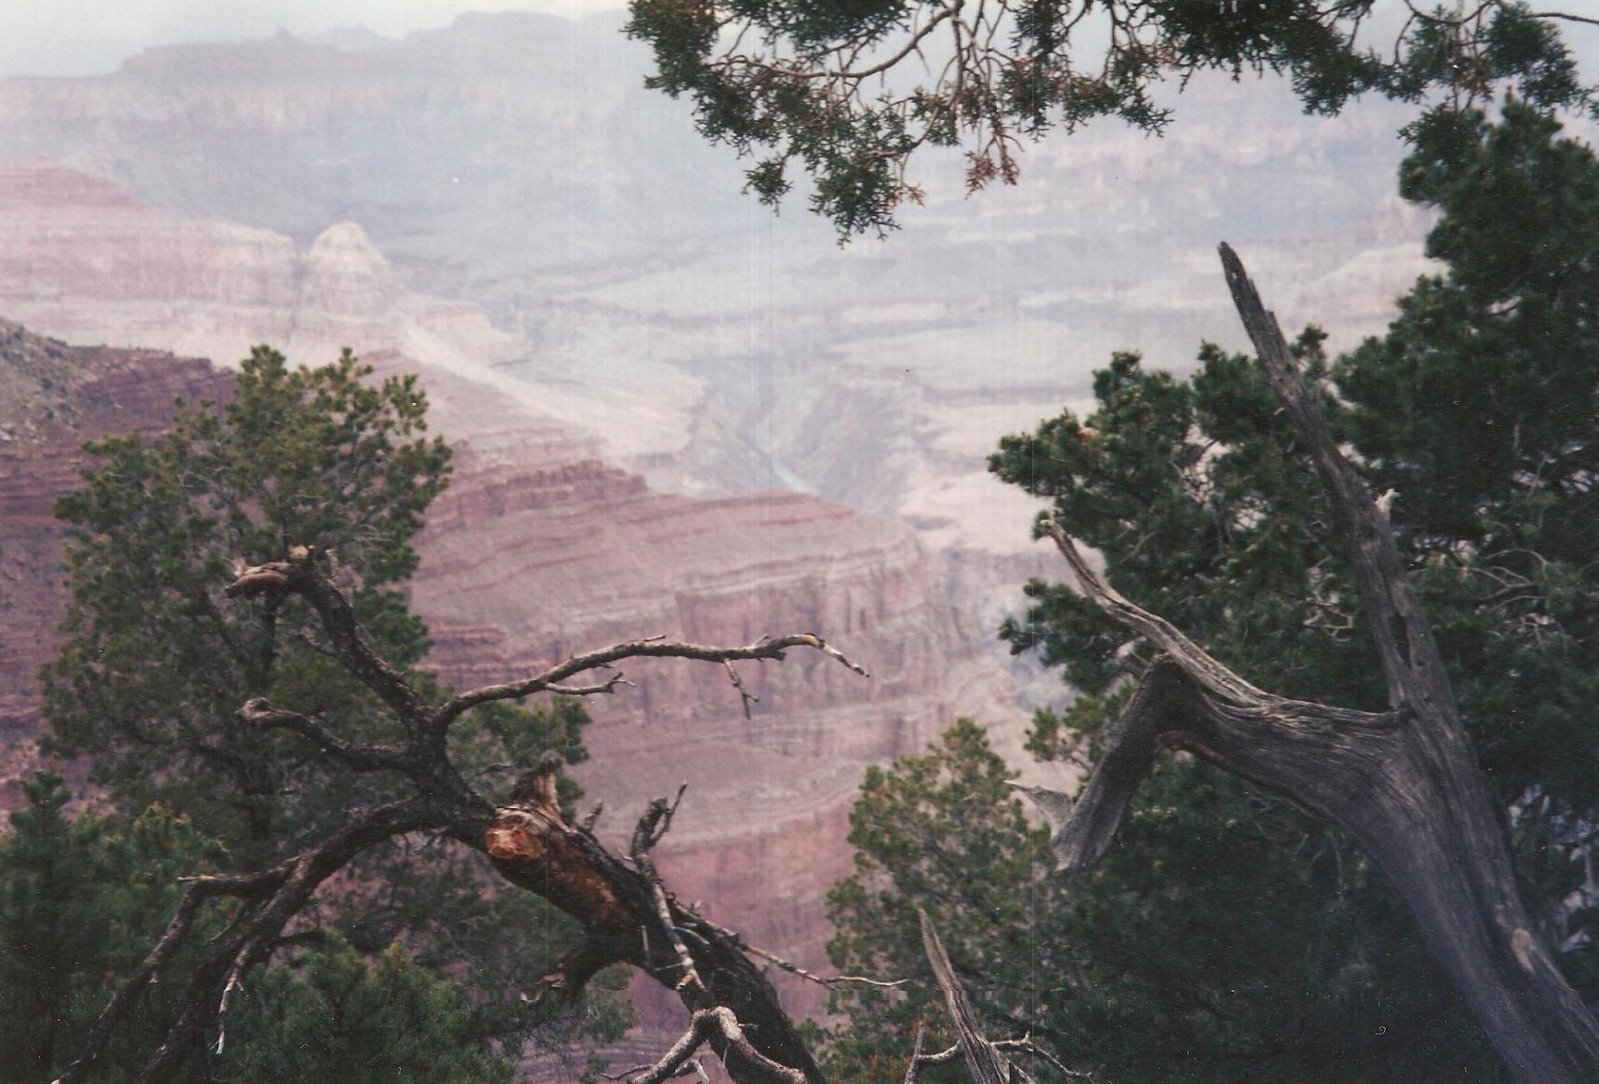 [A+Canyon+View+From+A+Tree+001.jpg]